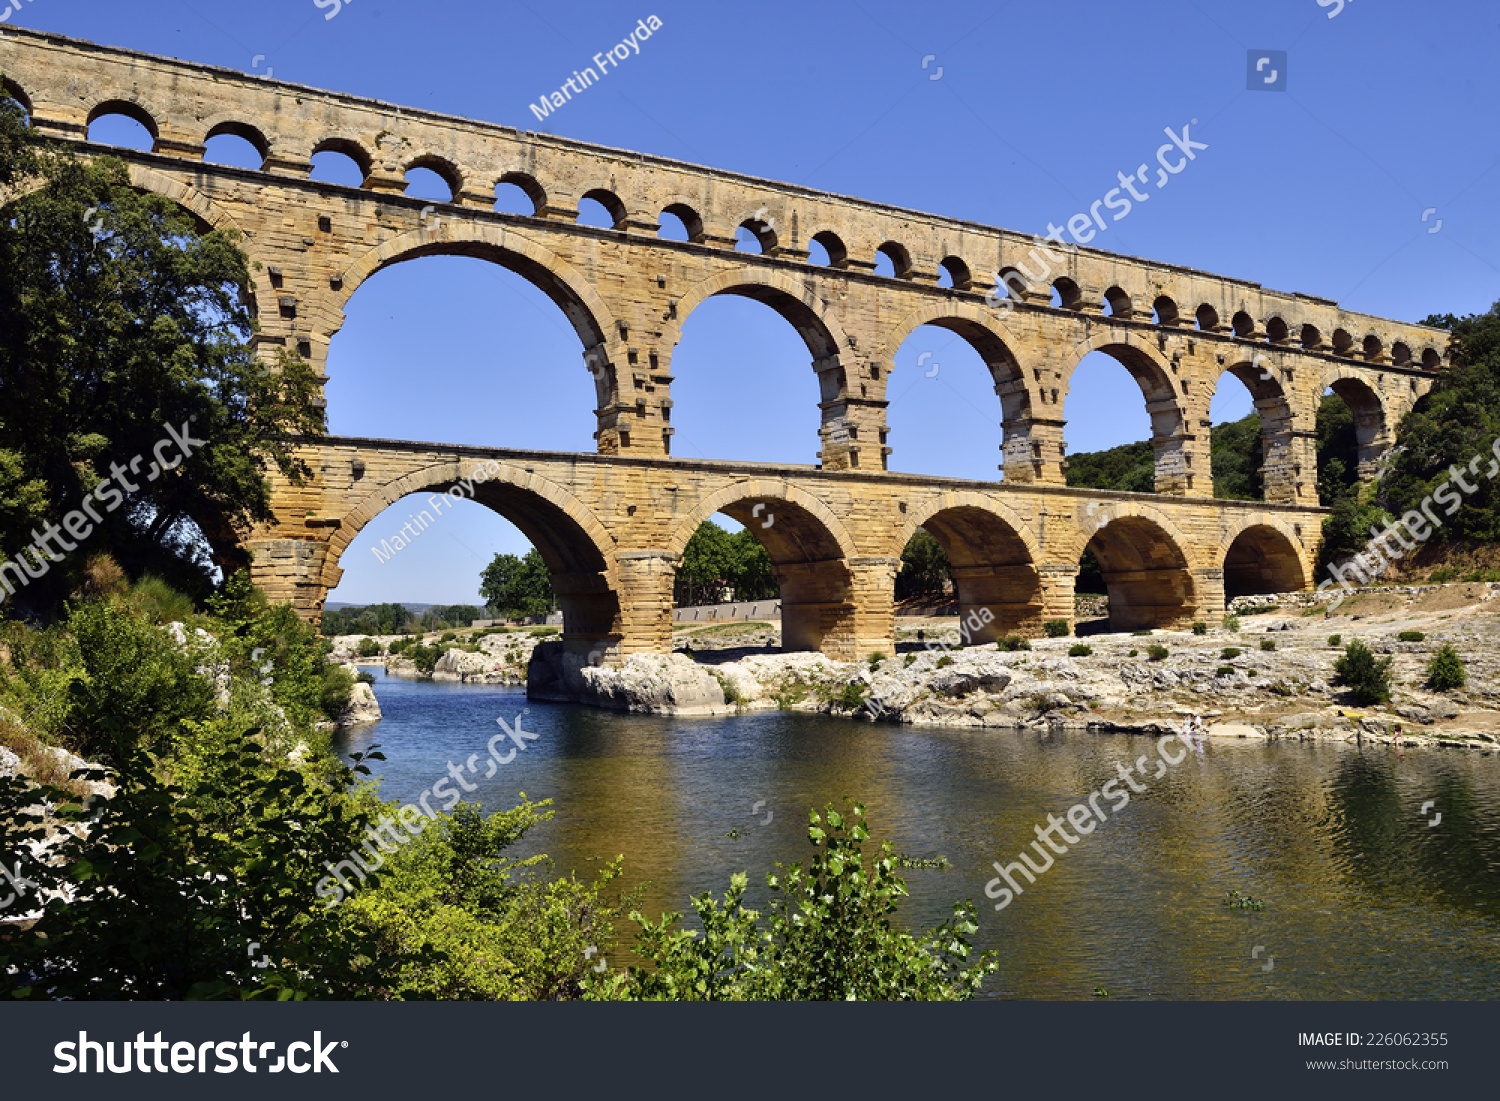 How Old Is The Aqueduct At Nimes 116